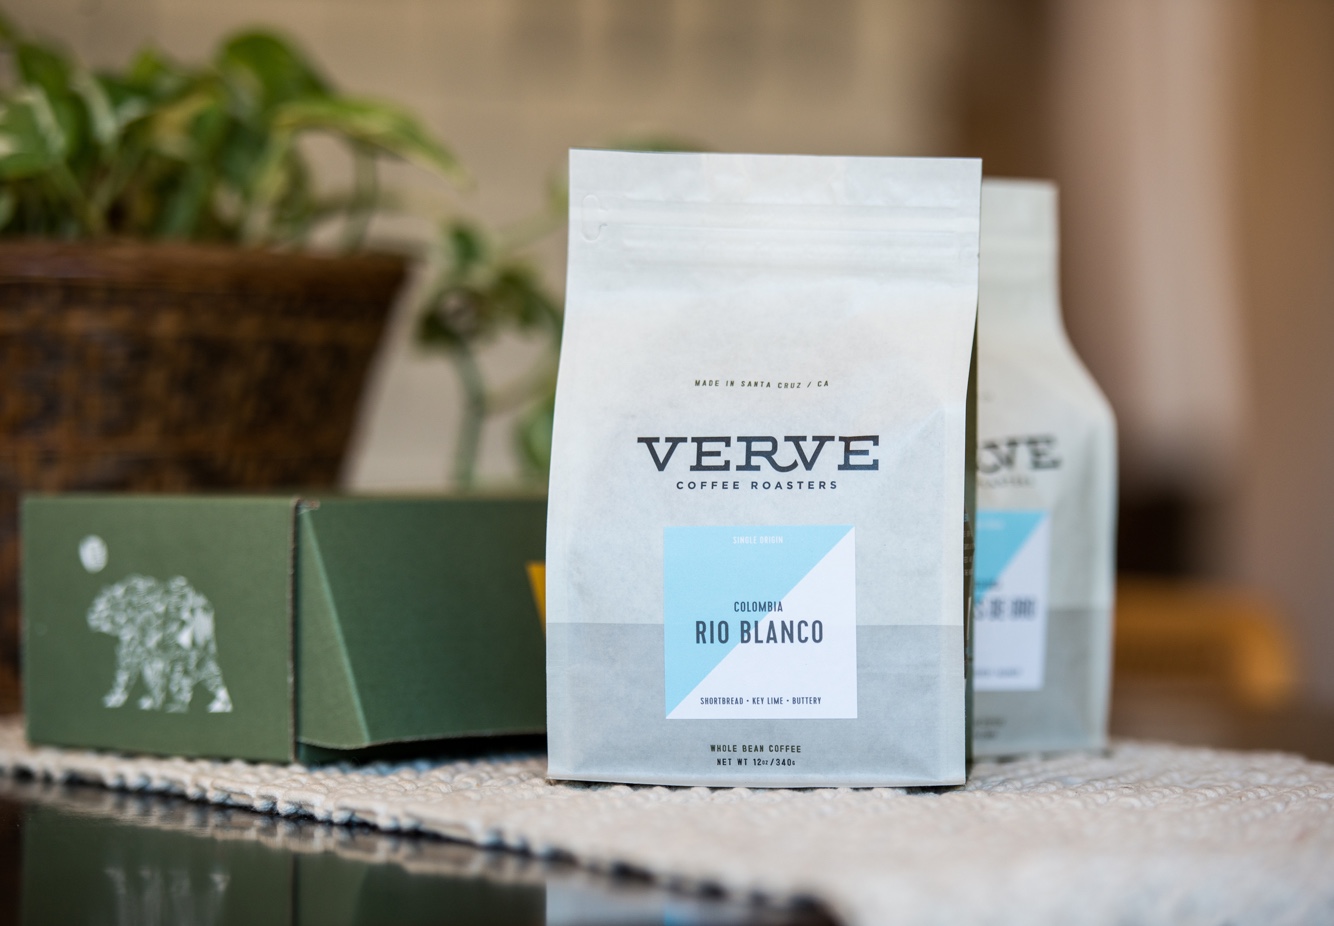 Verve Coffee grew subscribers by 113% in the first 6 months